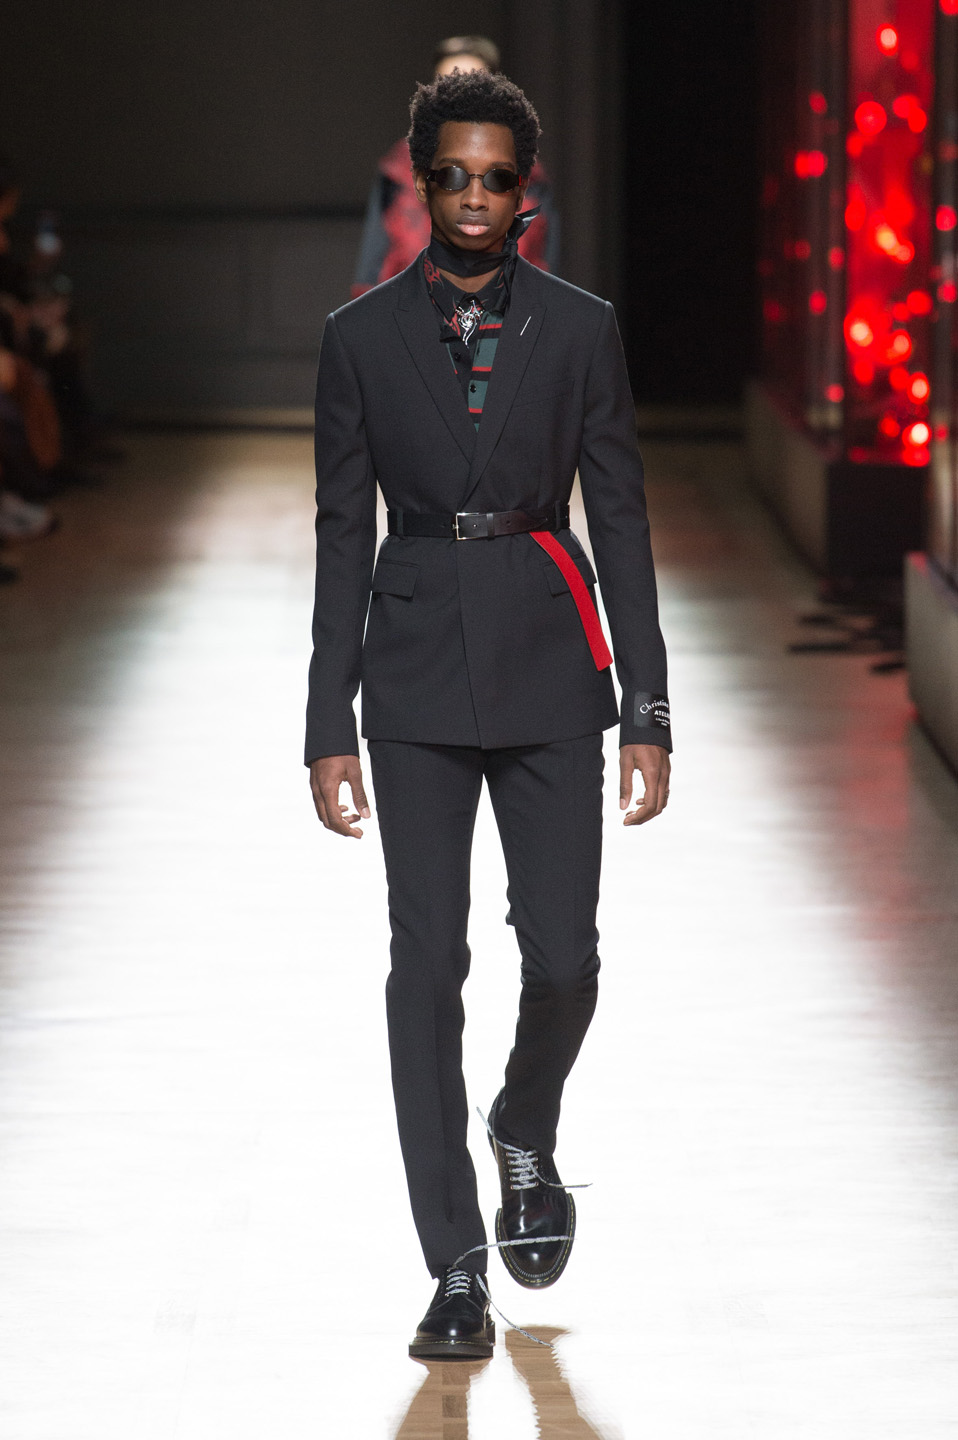 DIOR HOMME WINTER 18 19 BY PATRICE STABLE look23 Fall/WInter 2018 runway